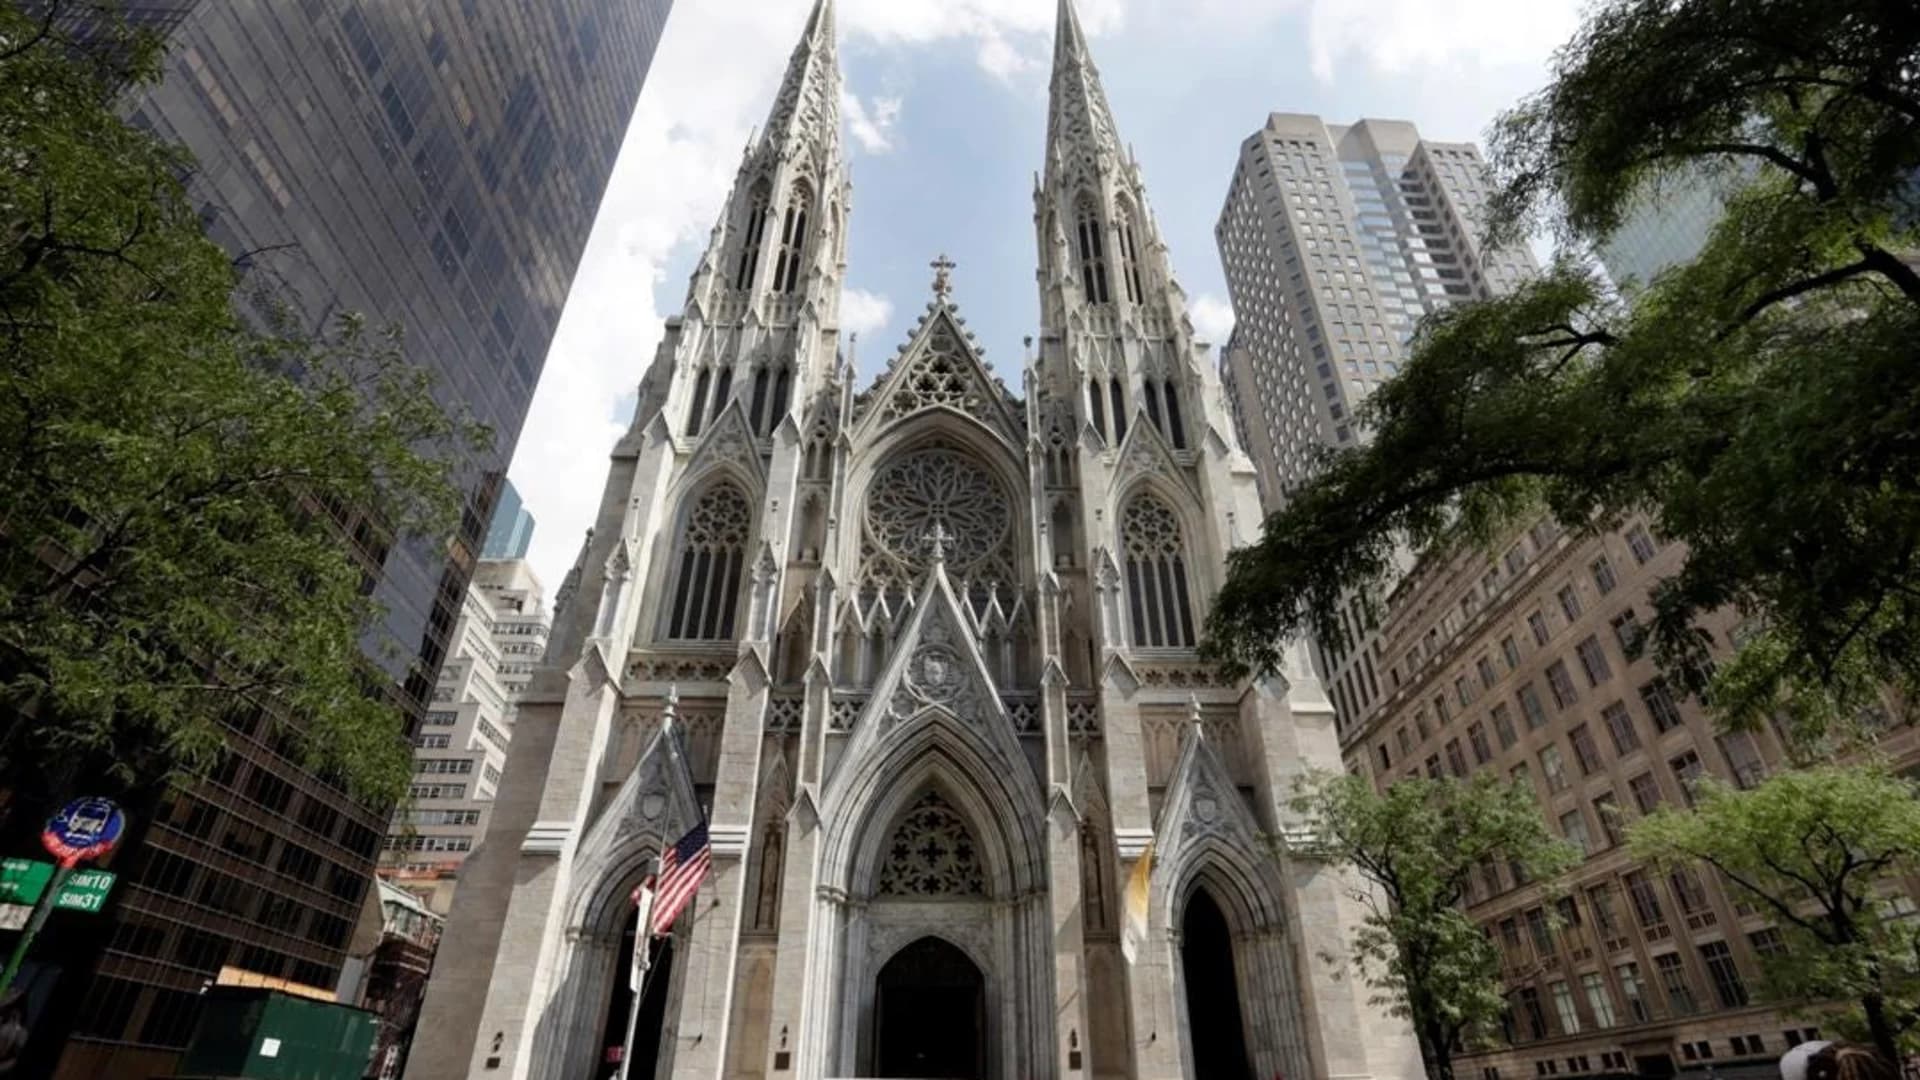 NYPD: Man with gas cans tried to enter St. Patrick's church